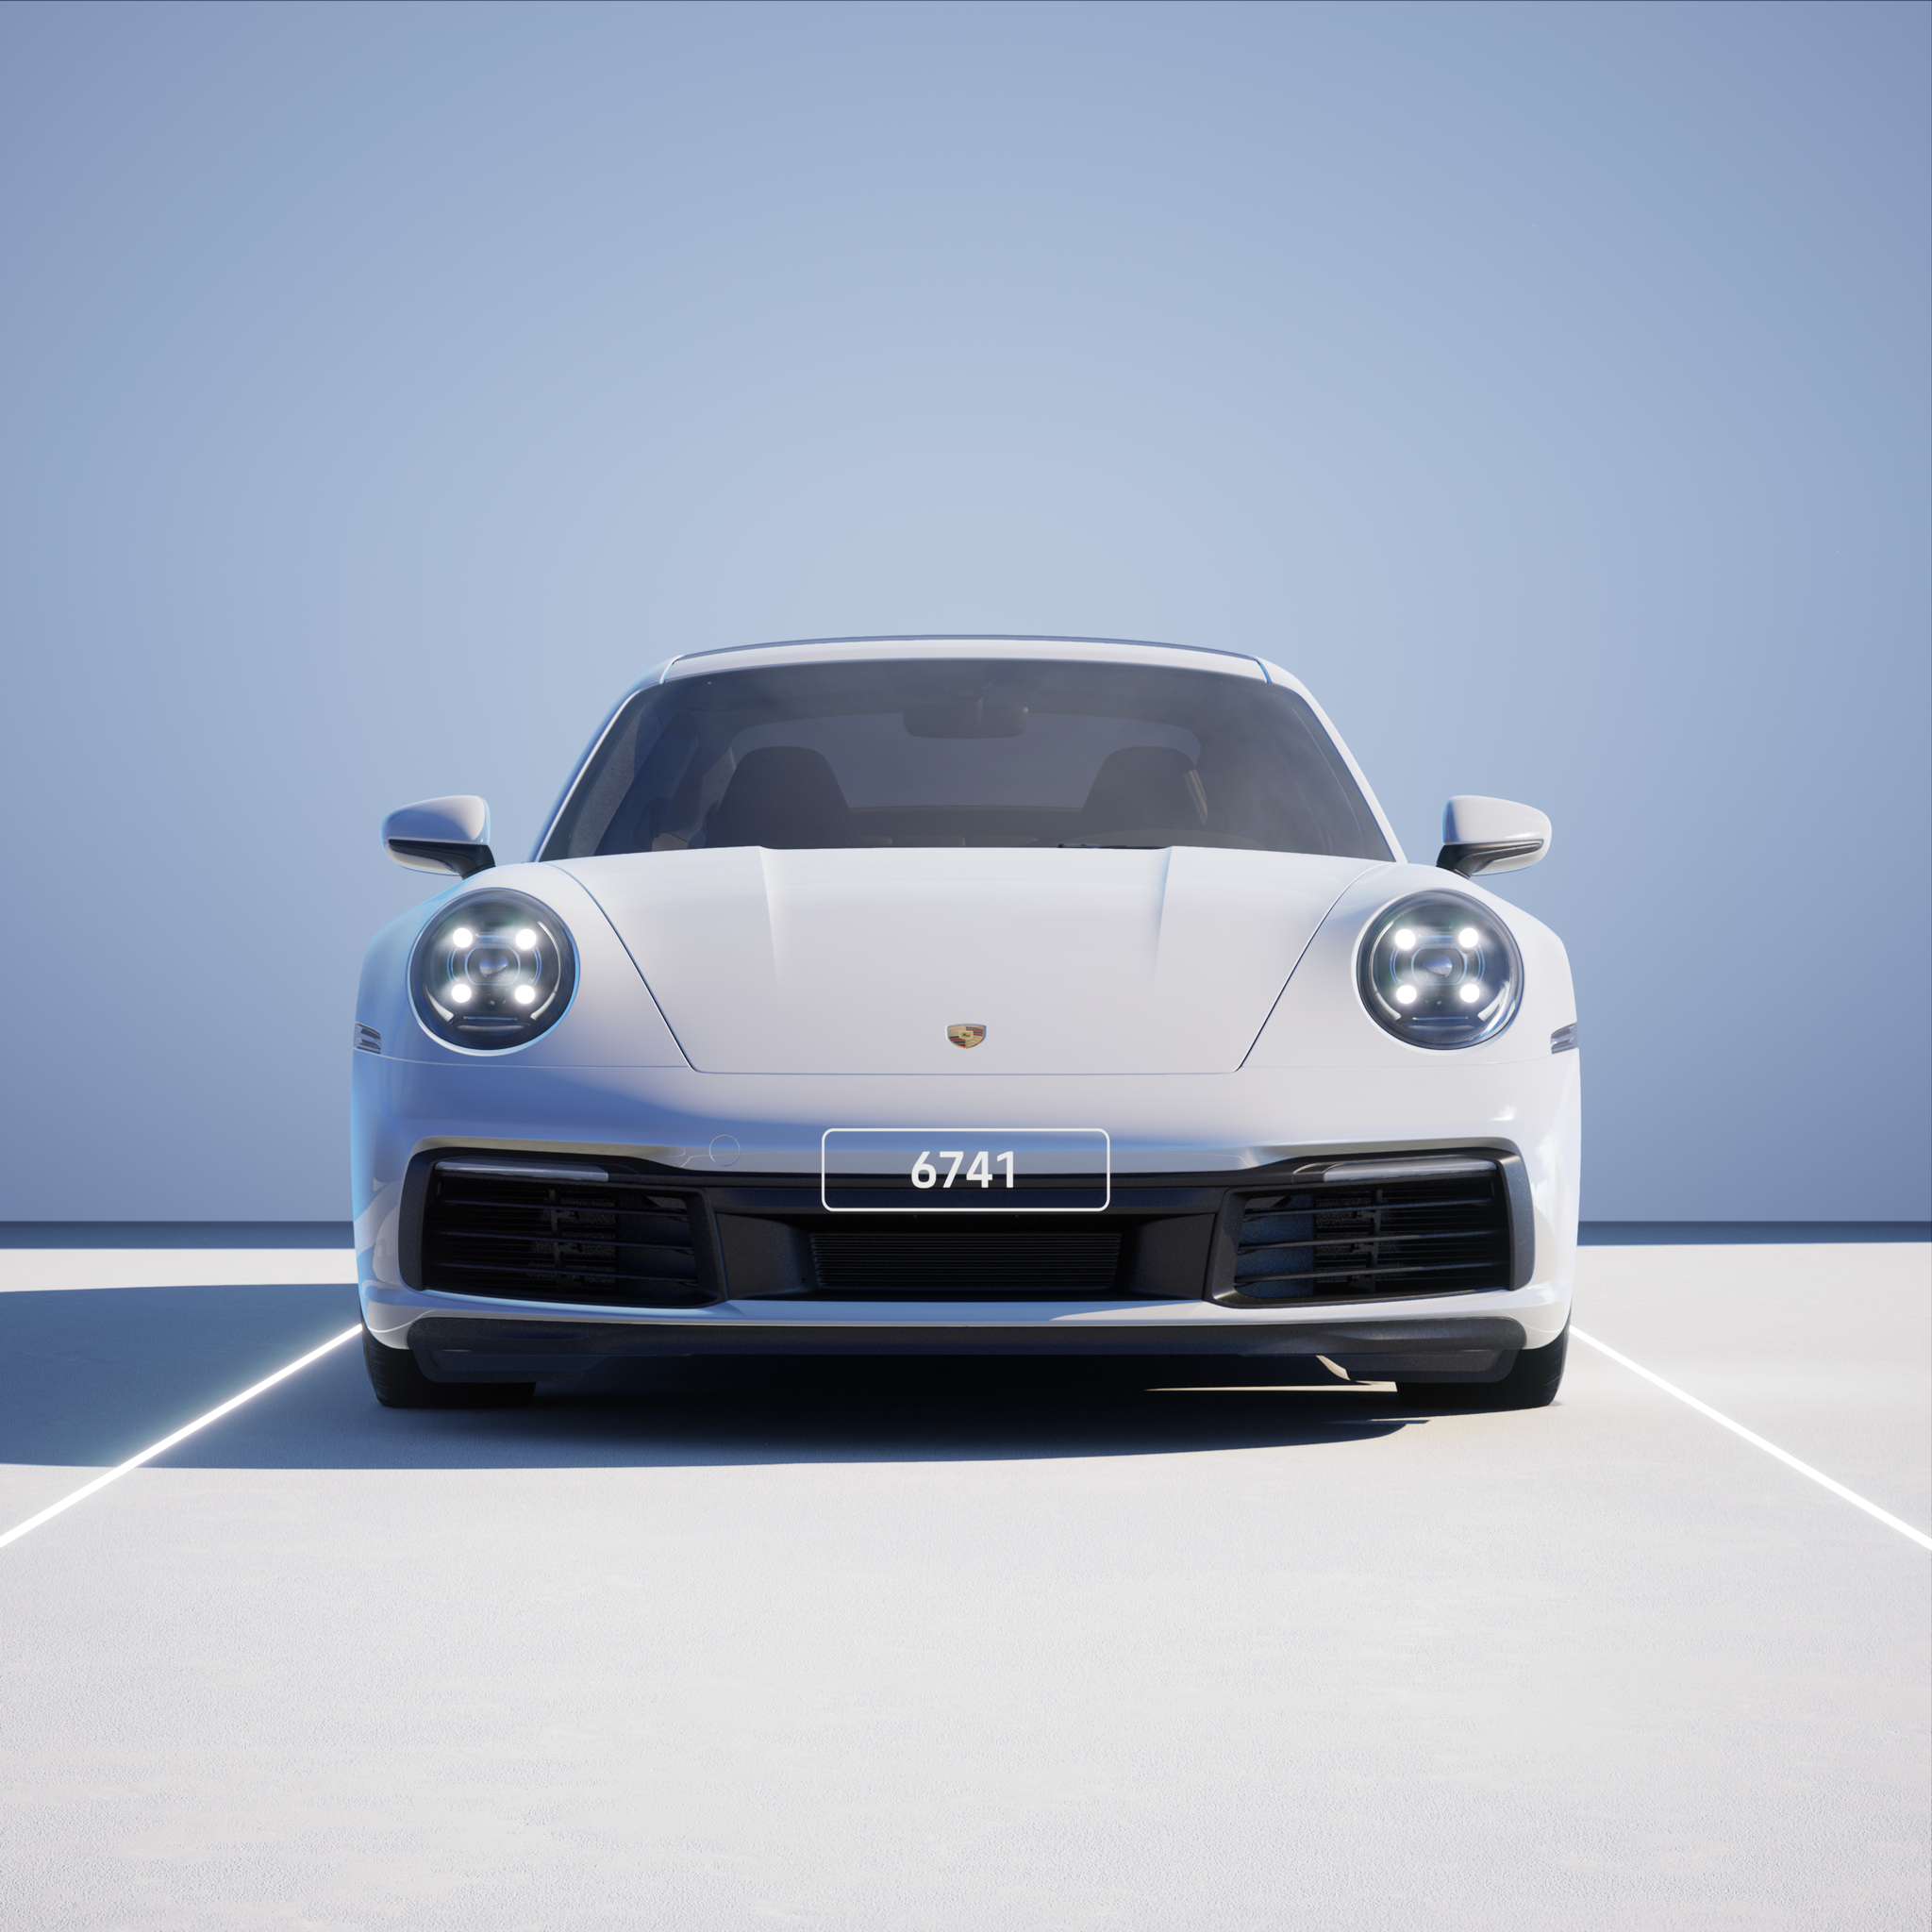 The PORSCHΞ 911 6741 image in phase